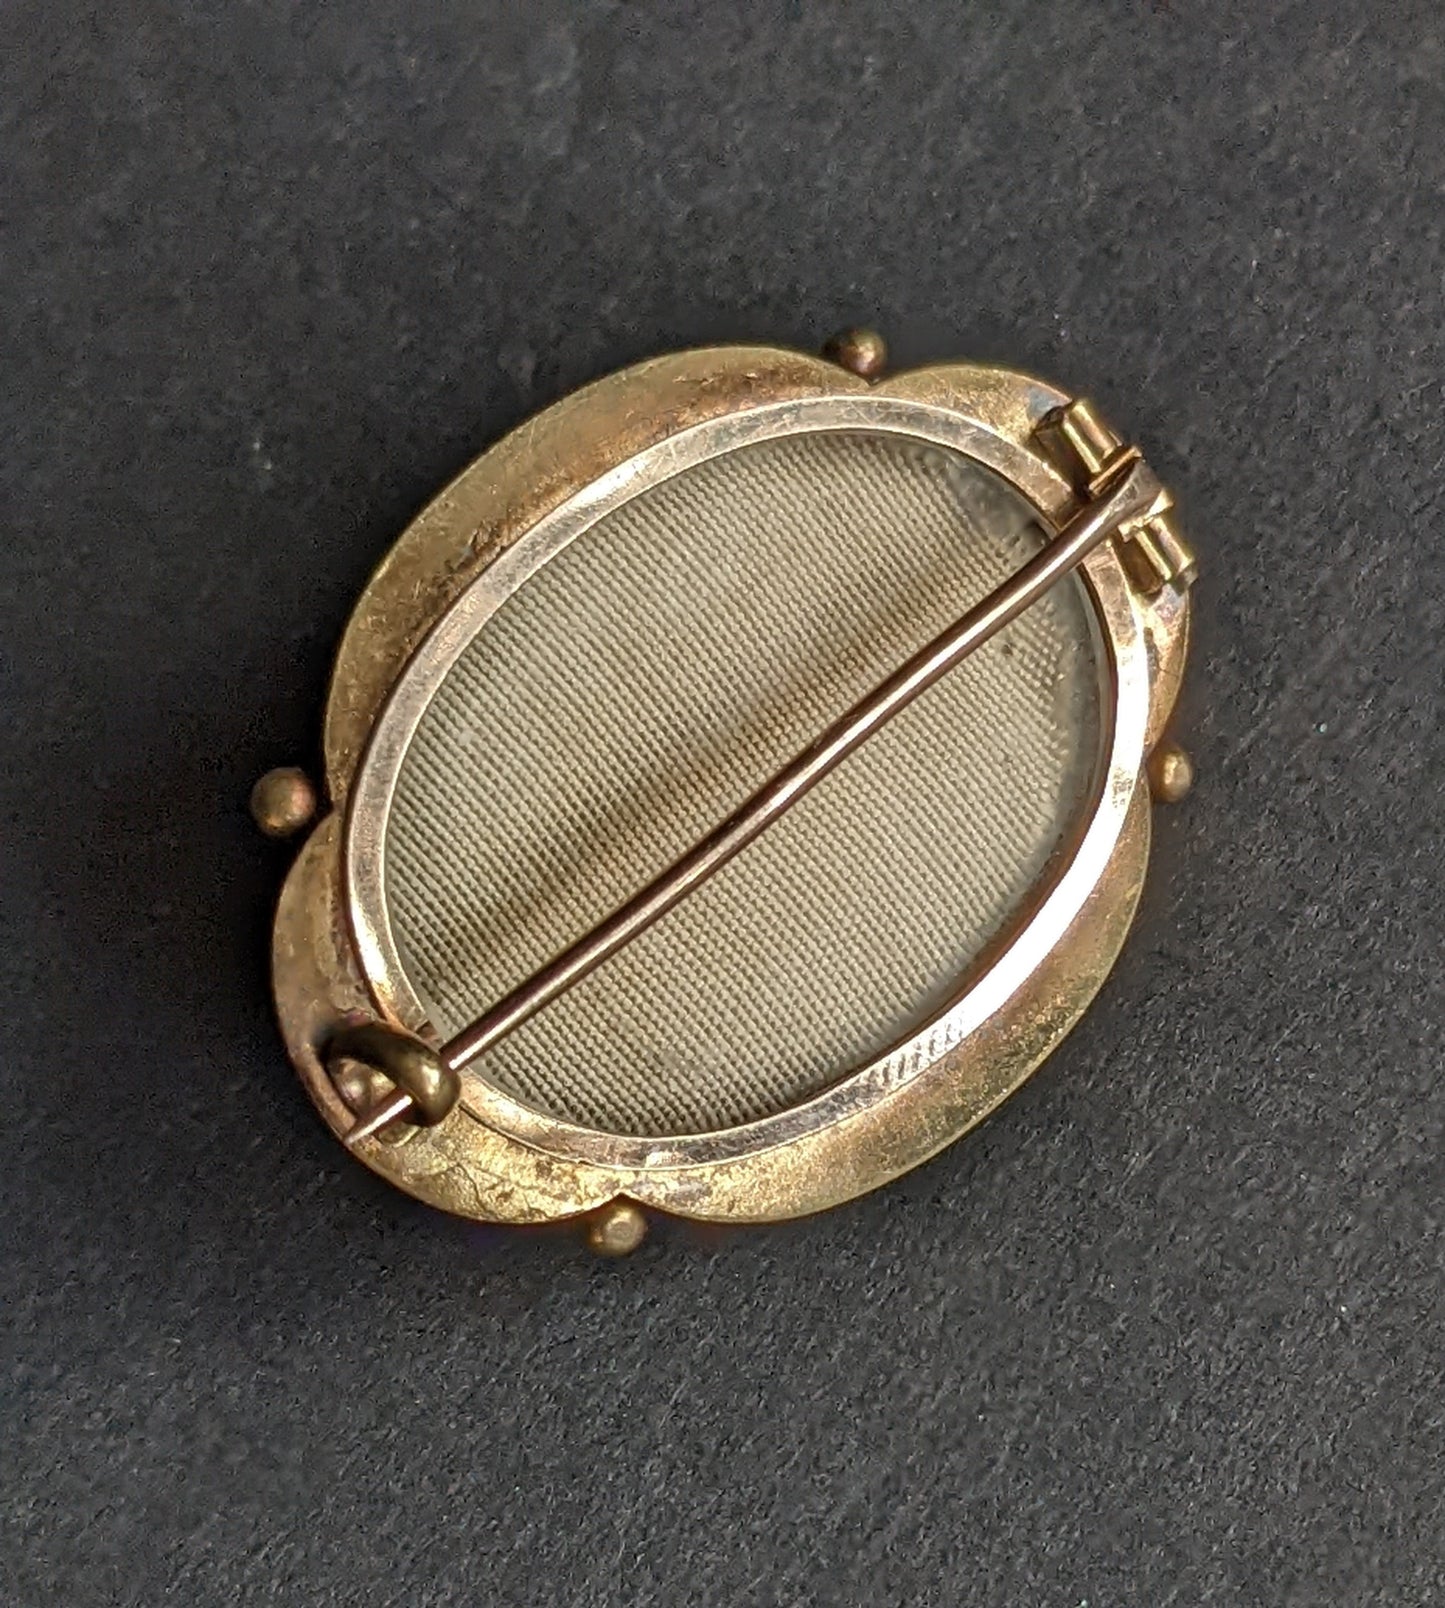 Gold Cannetille brooch 19kt with original pin and fastener